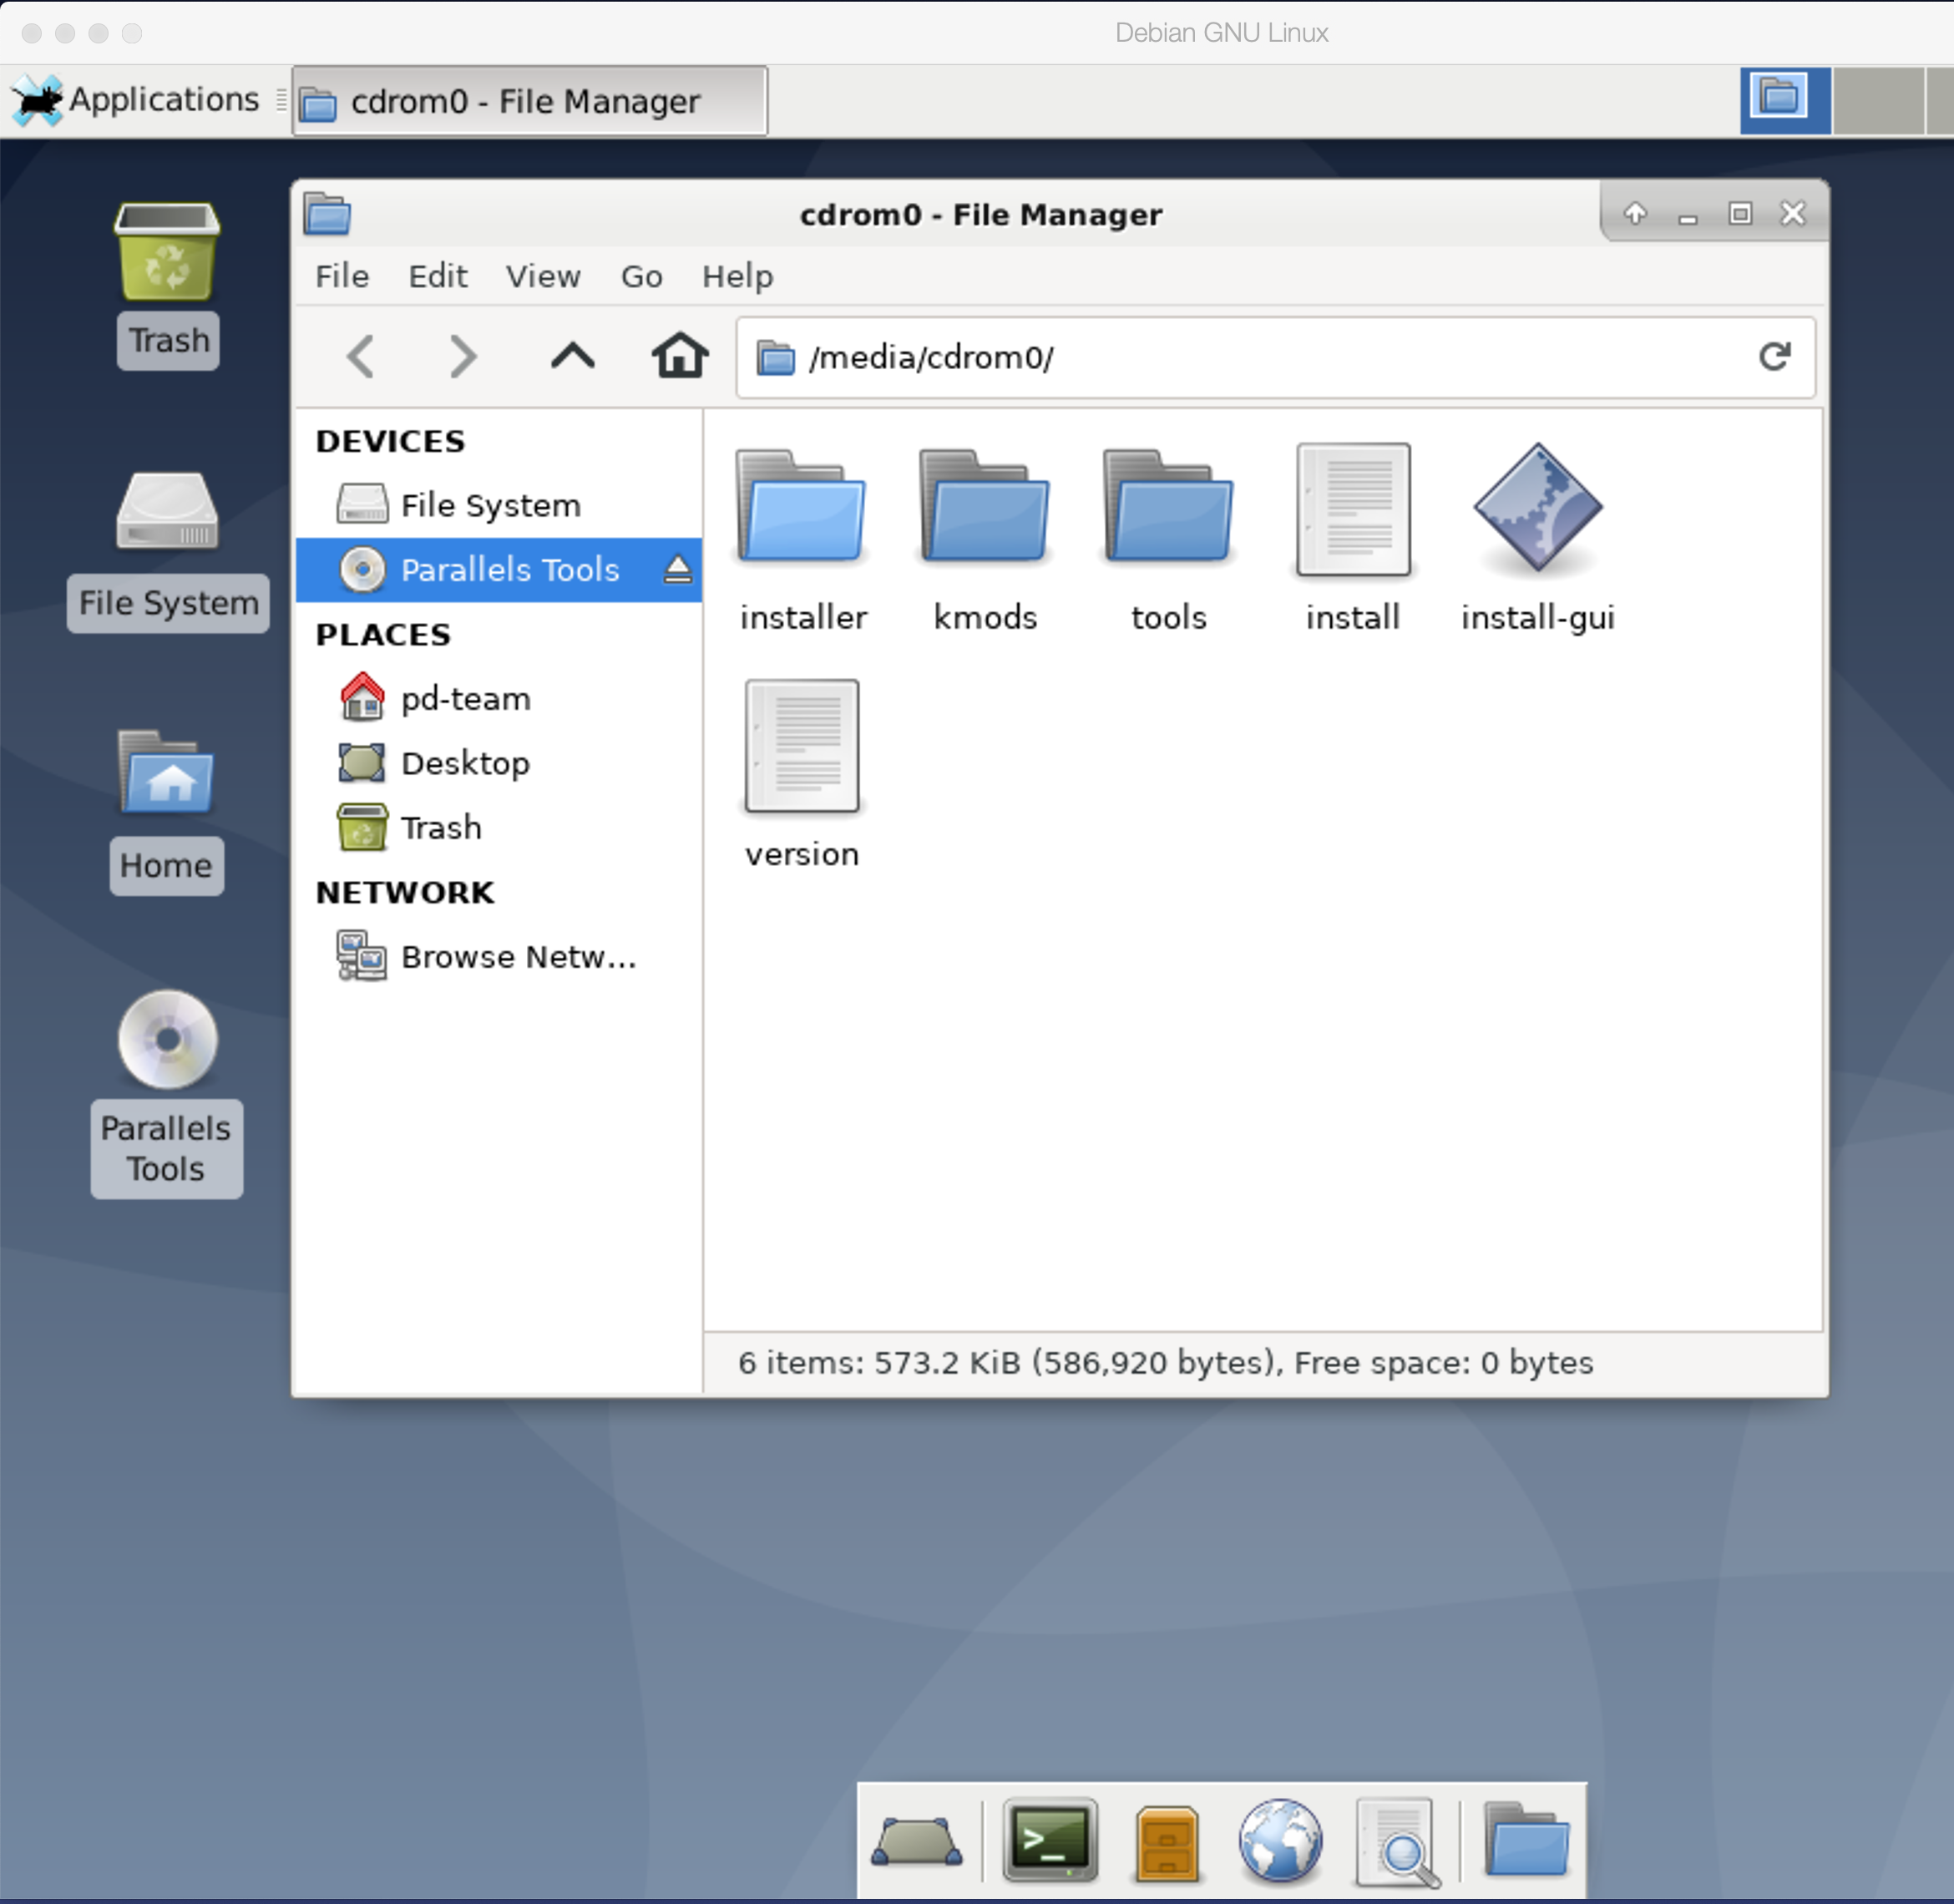 download parallels toolbox